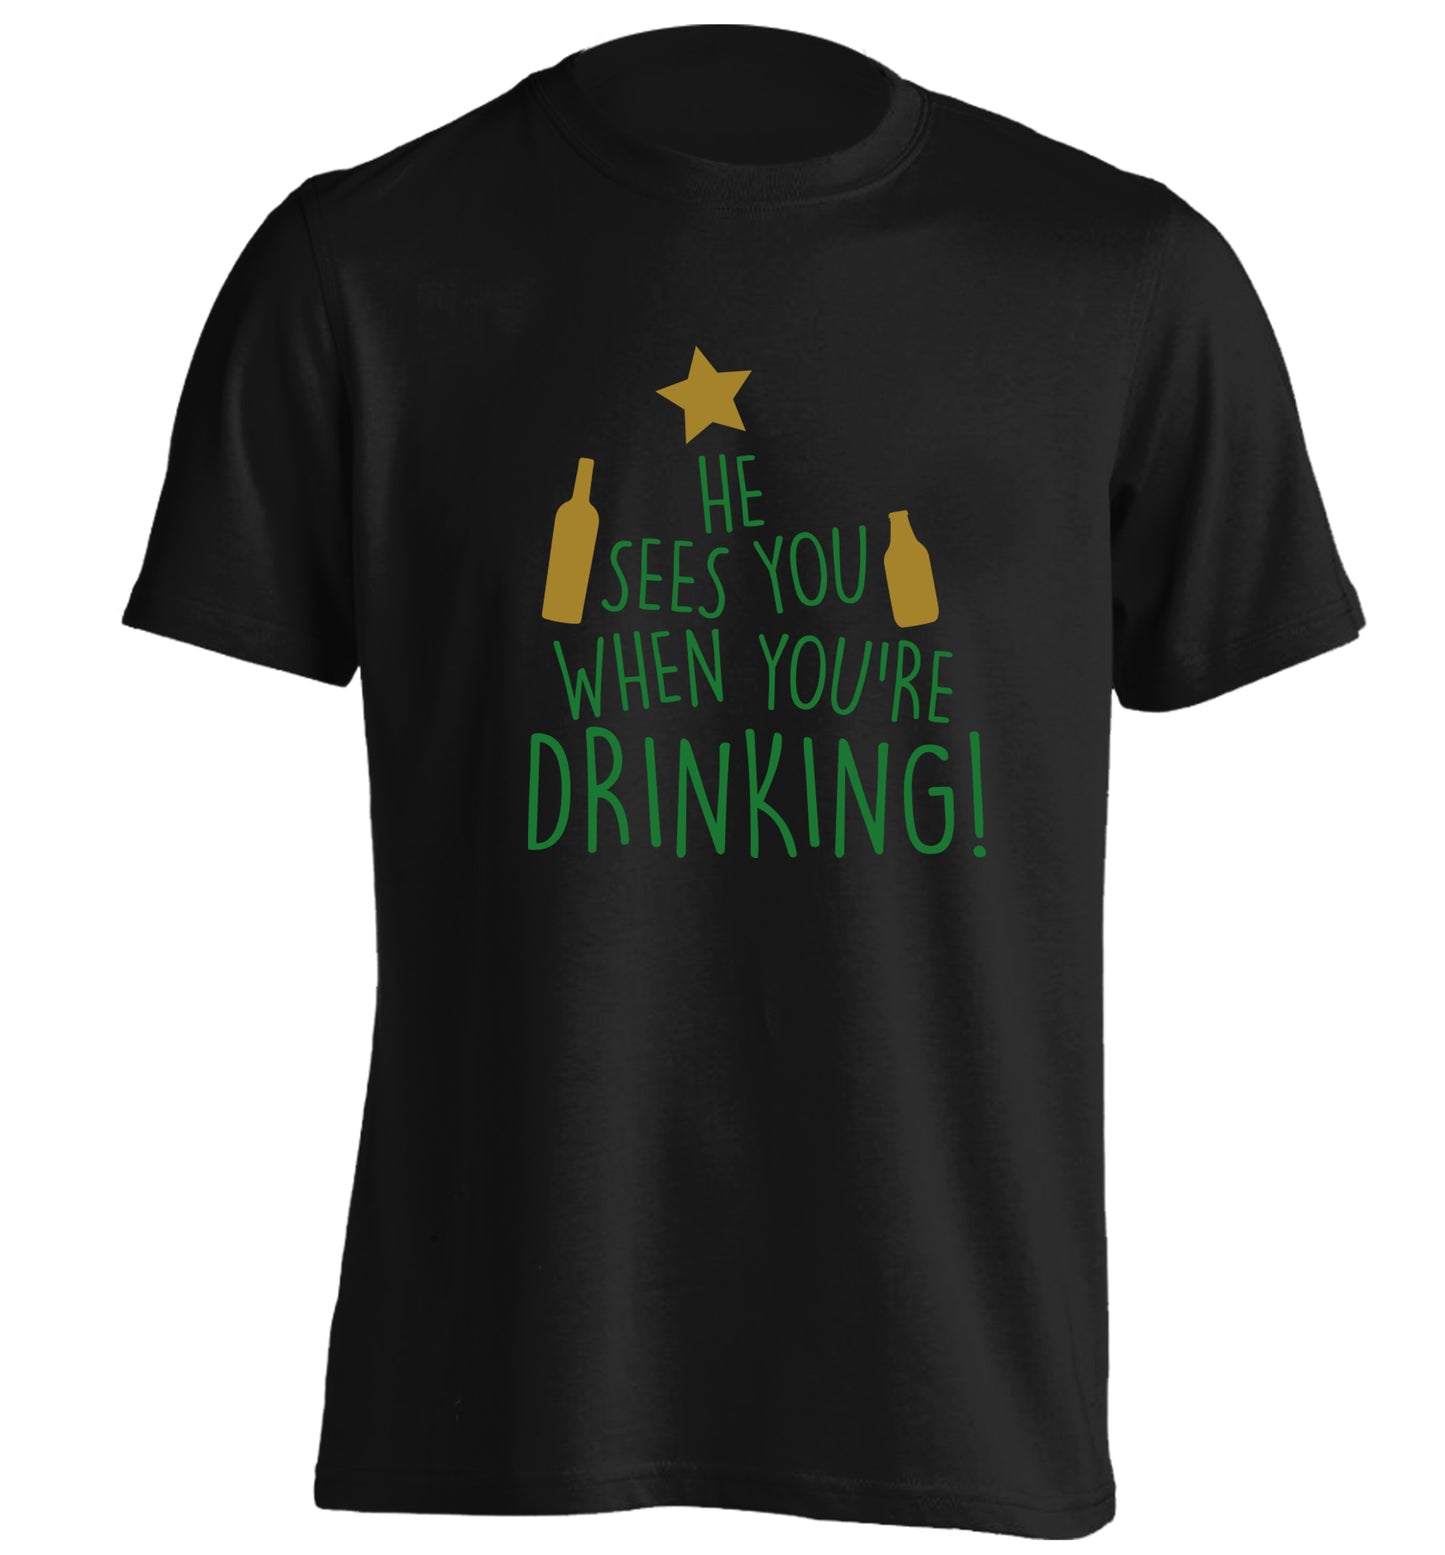 He sees you when you're drinking adults unisex black Tshirt 2XL